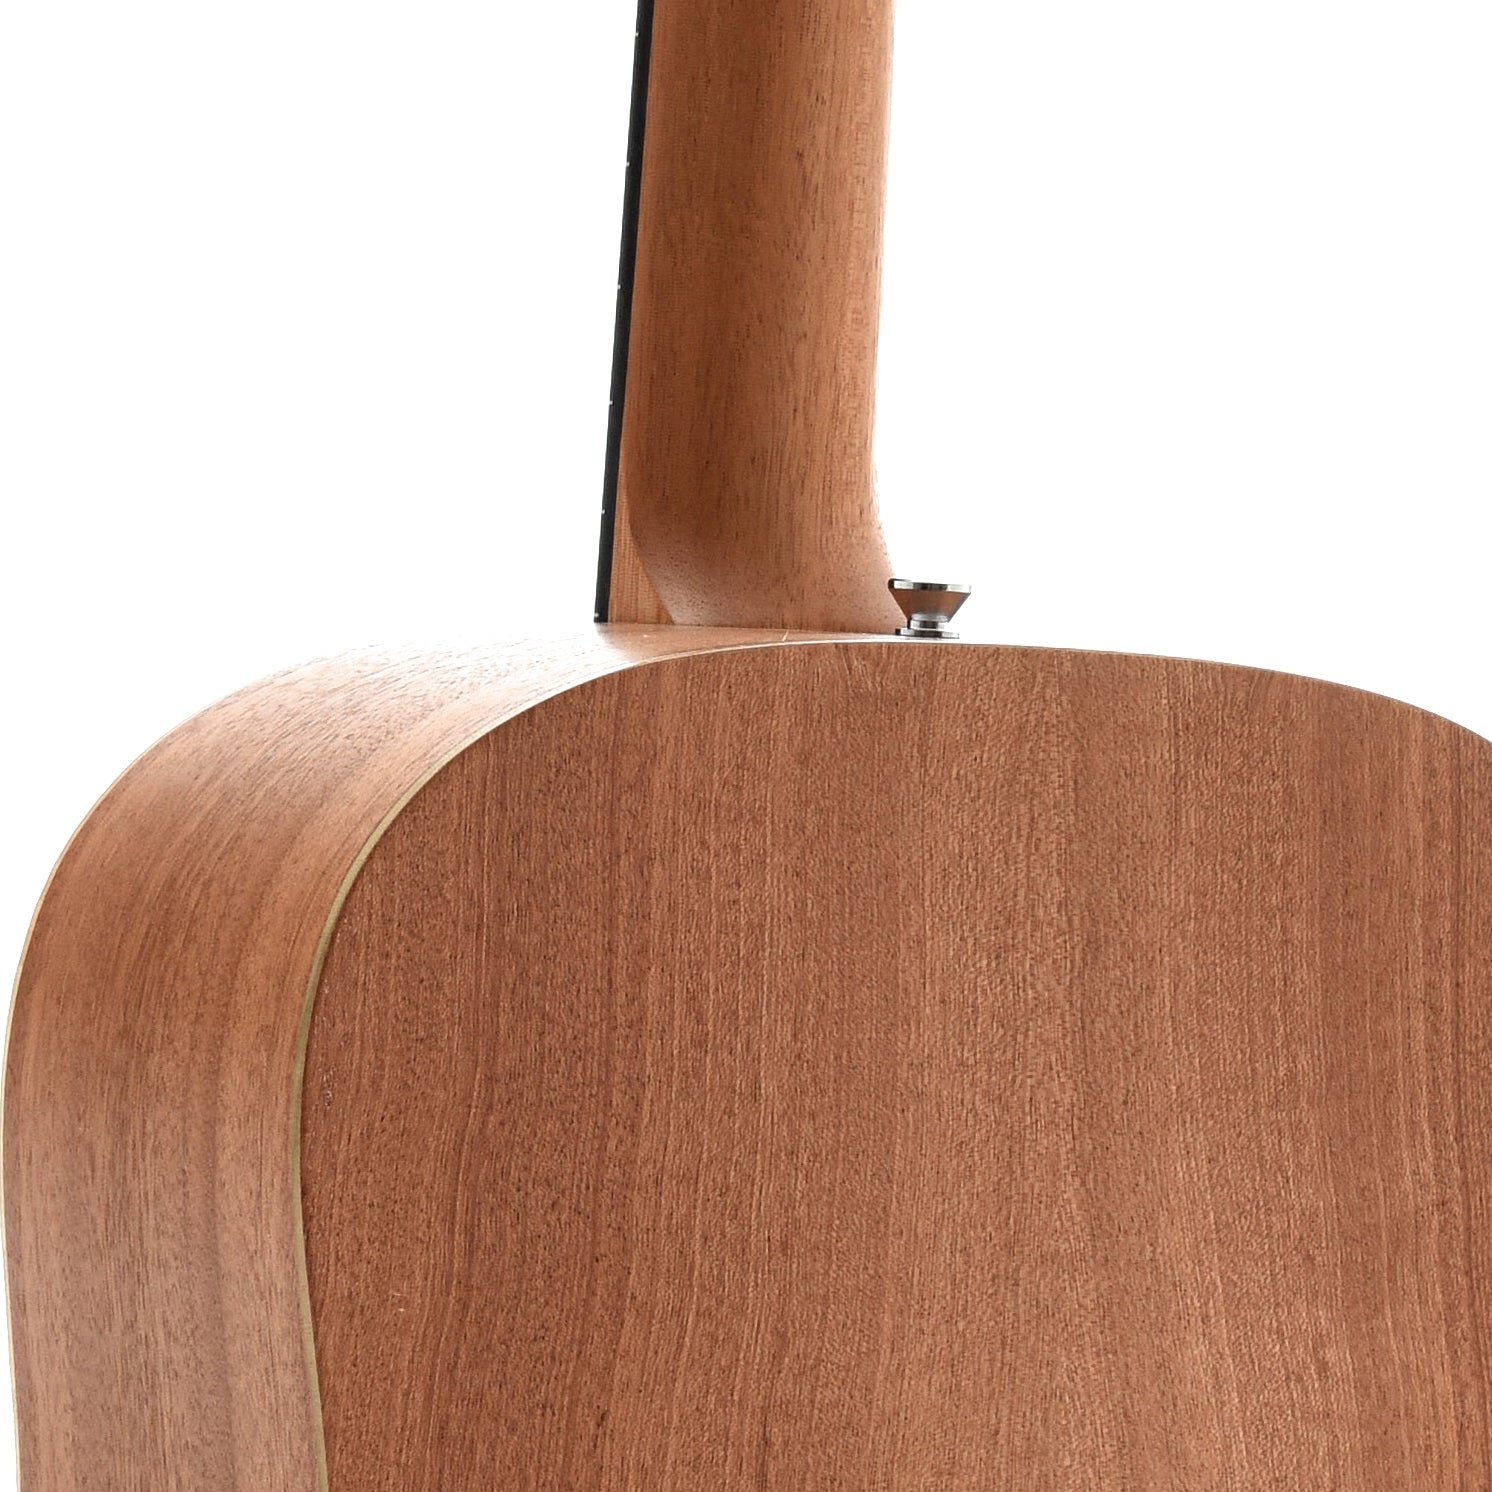 Neck Joint of Taylor BBT Big Baby Taylor Acoustic Guitar